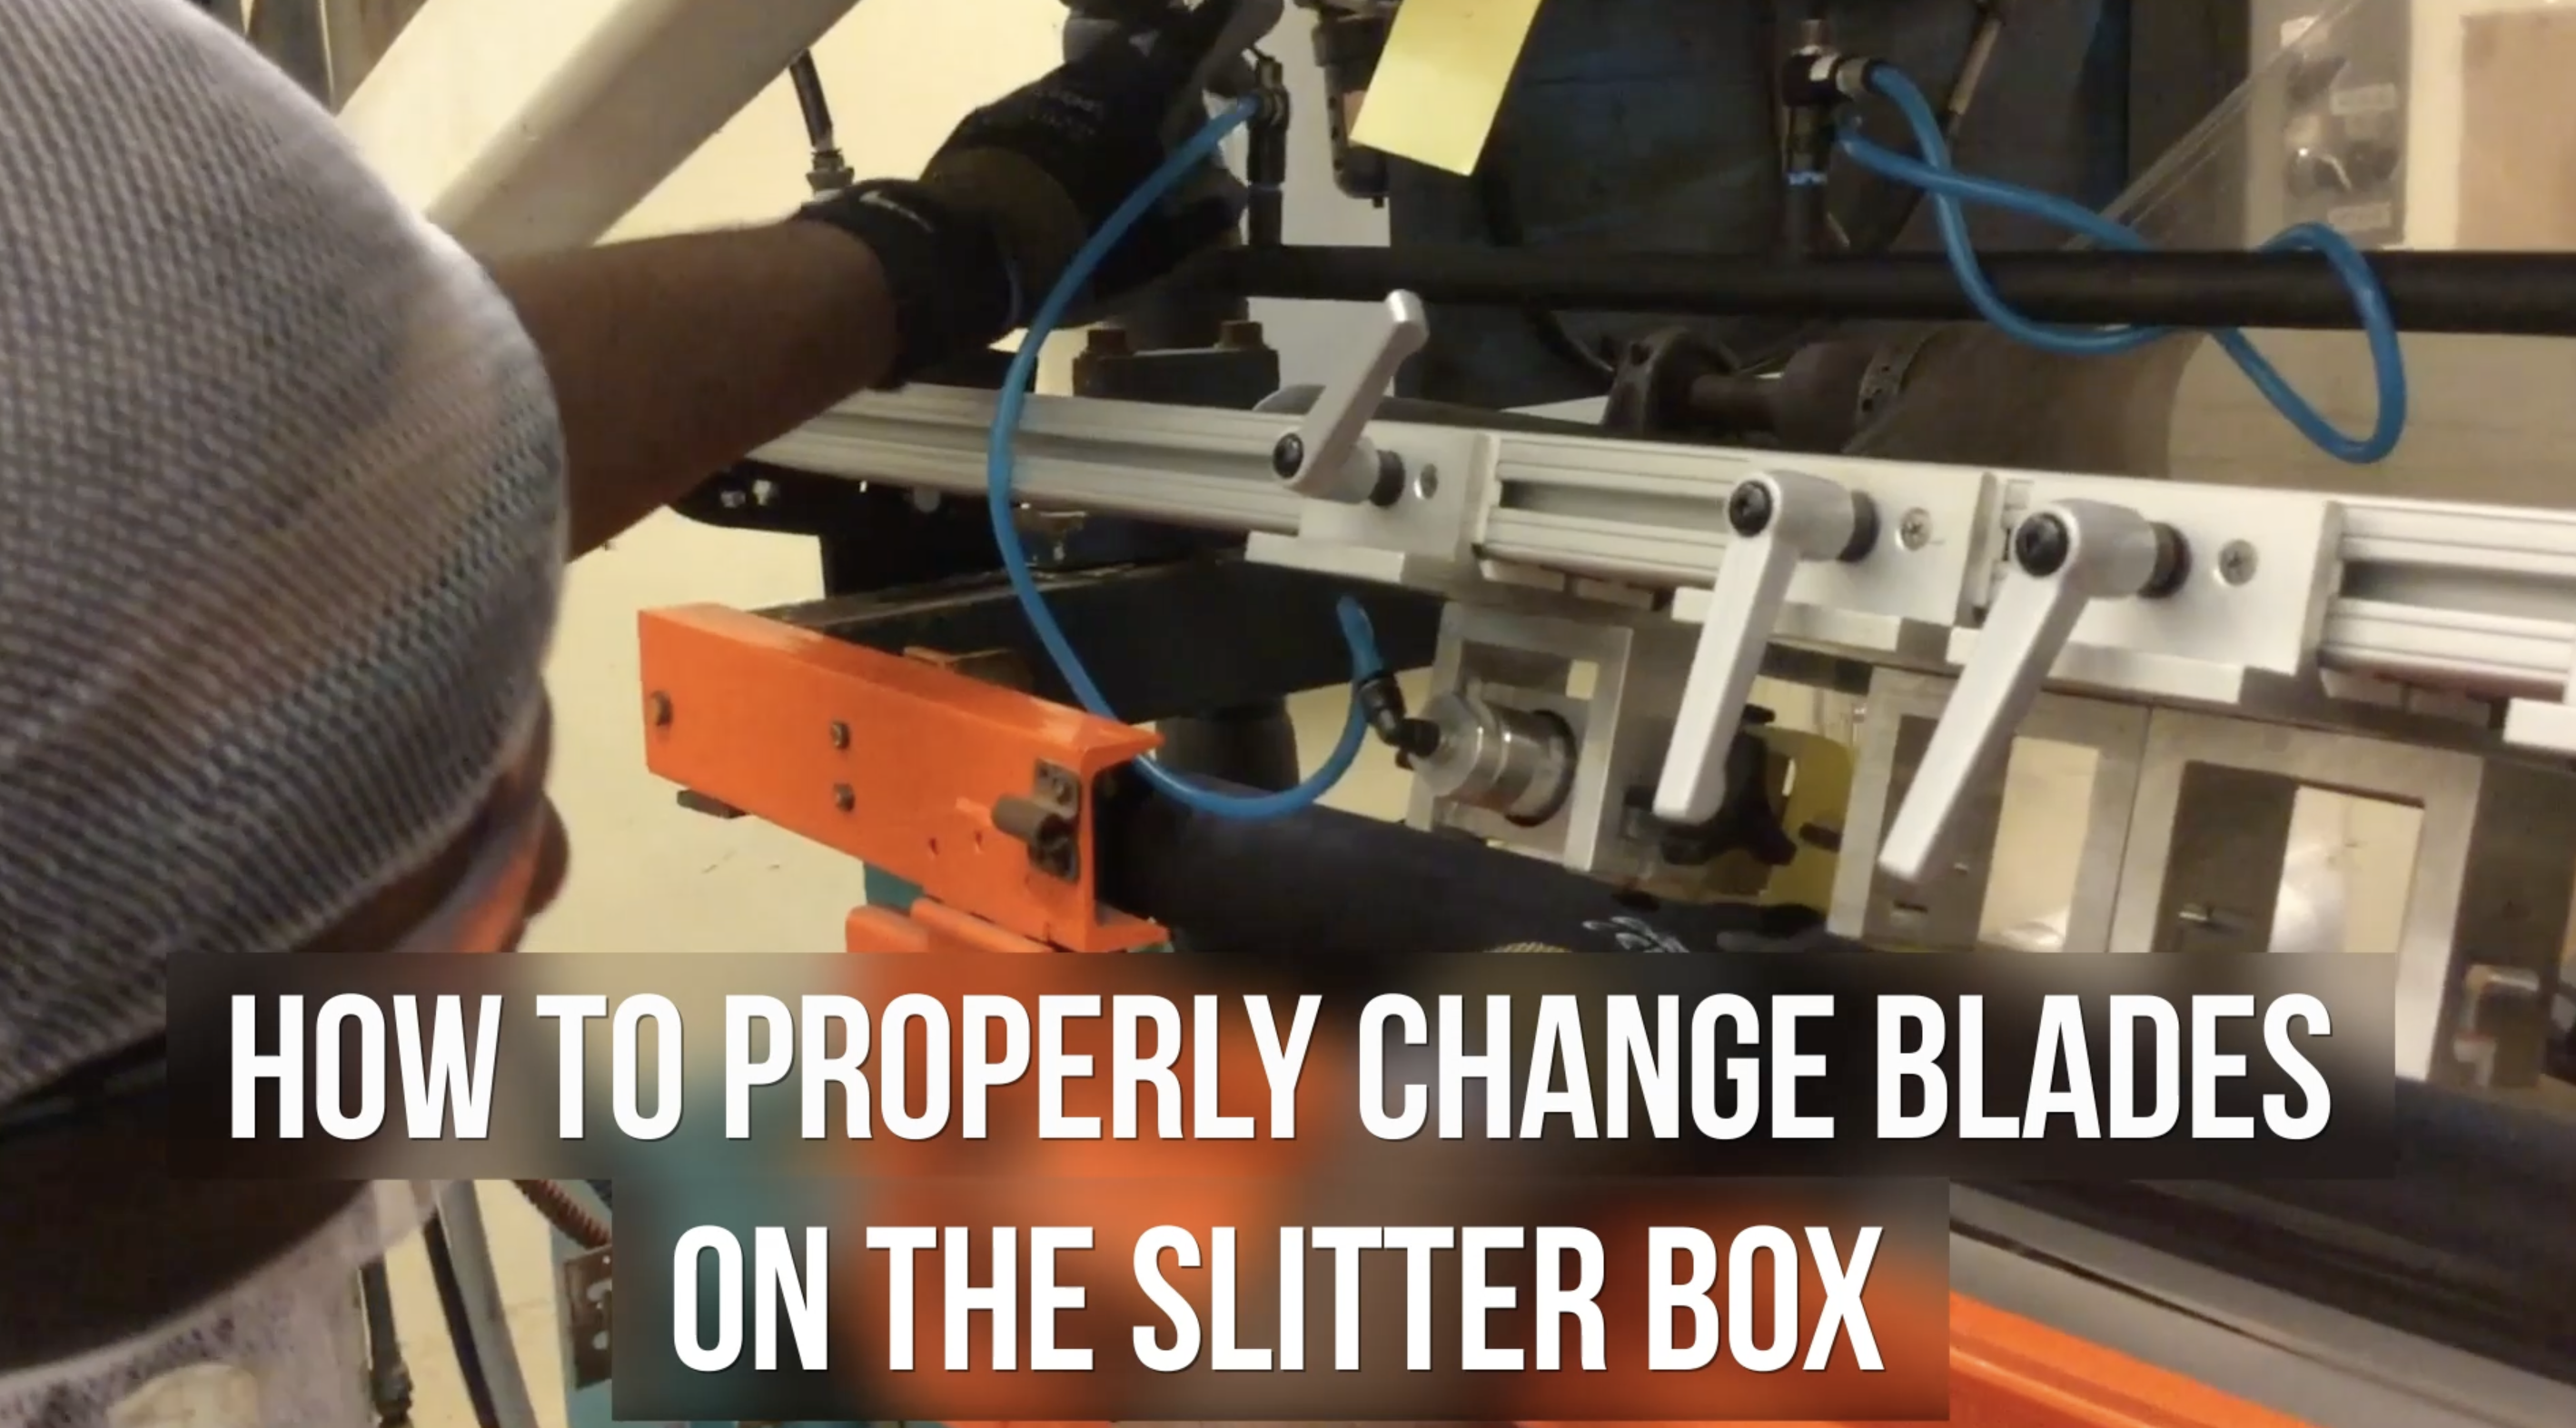 How to properly change blades on the slitter box